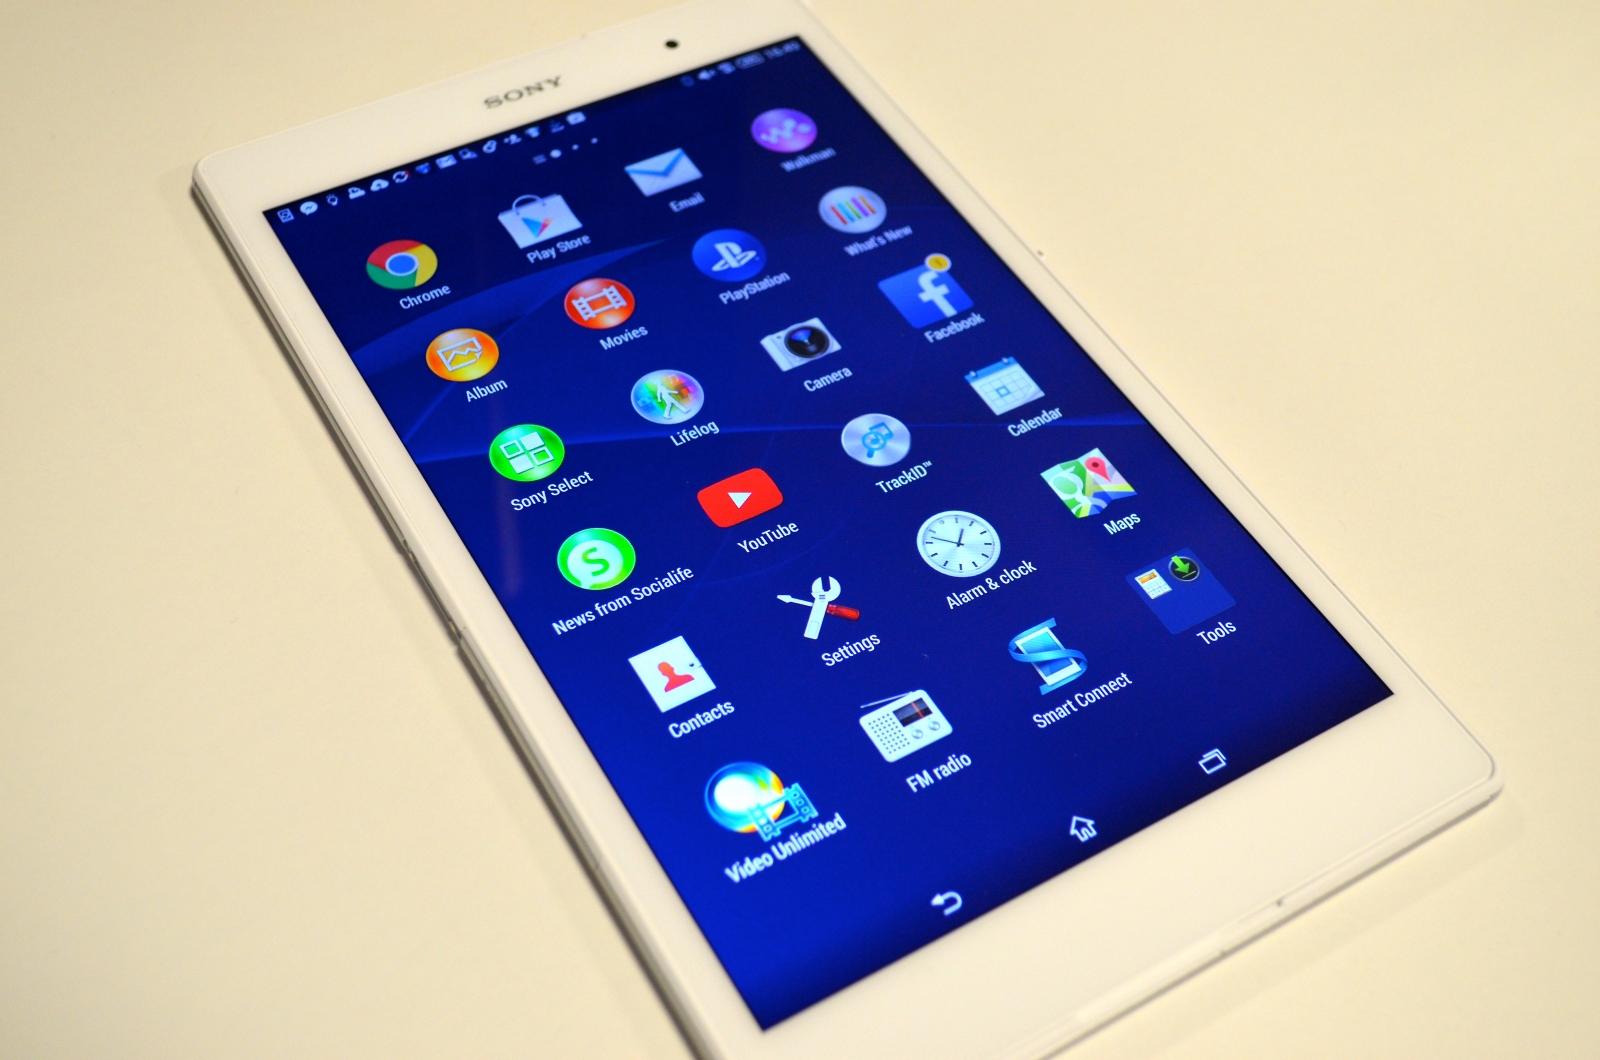 Sony Xperia Z3 Tablet Compact Review: A True Rival to the iPad Mini